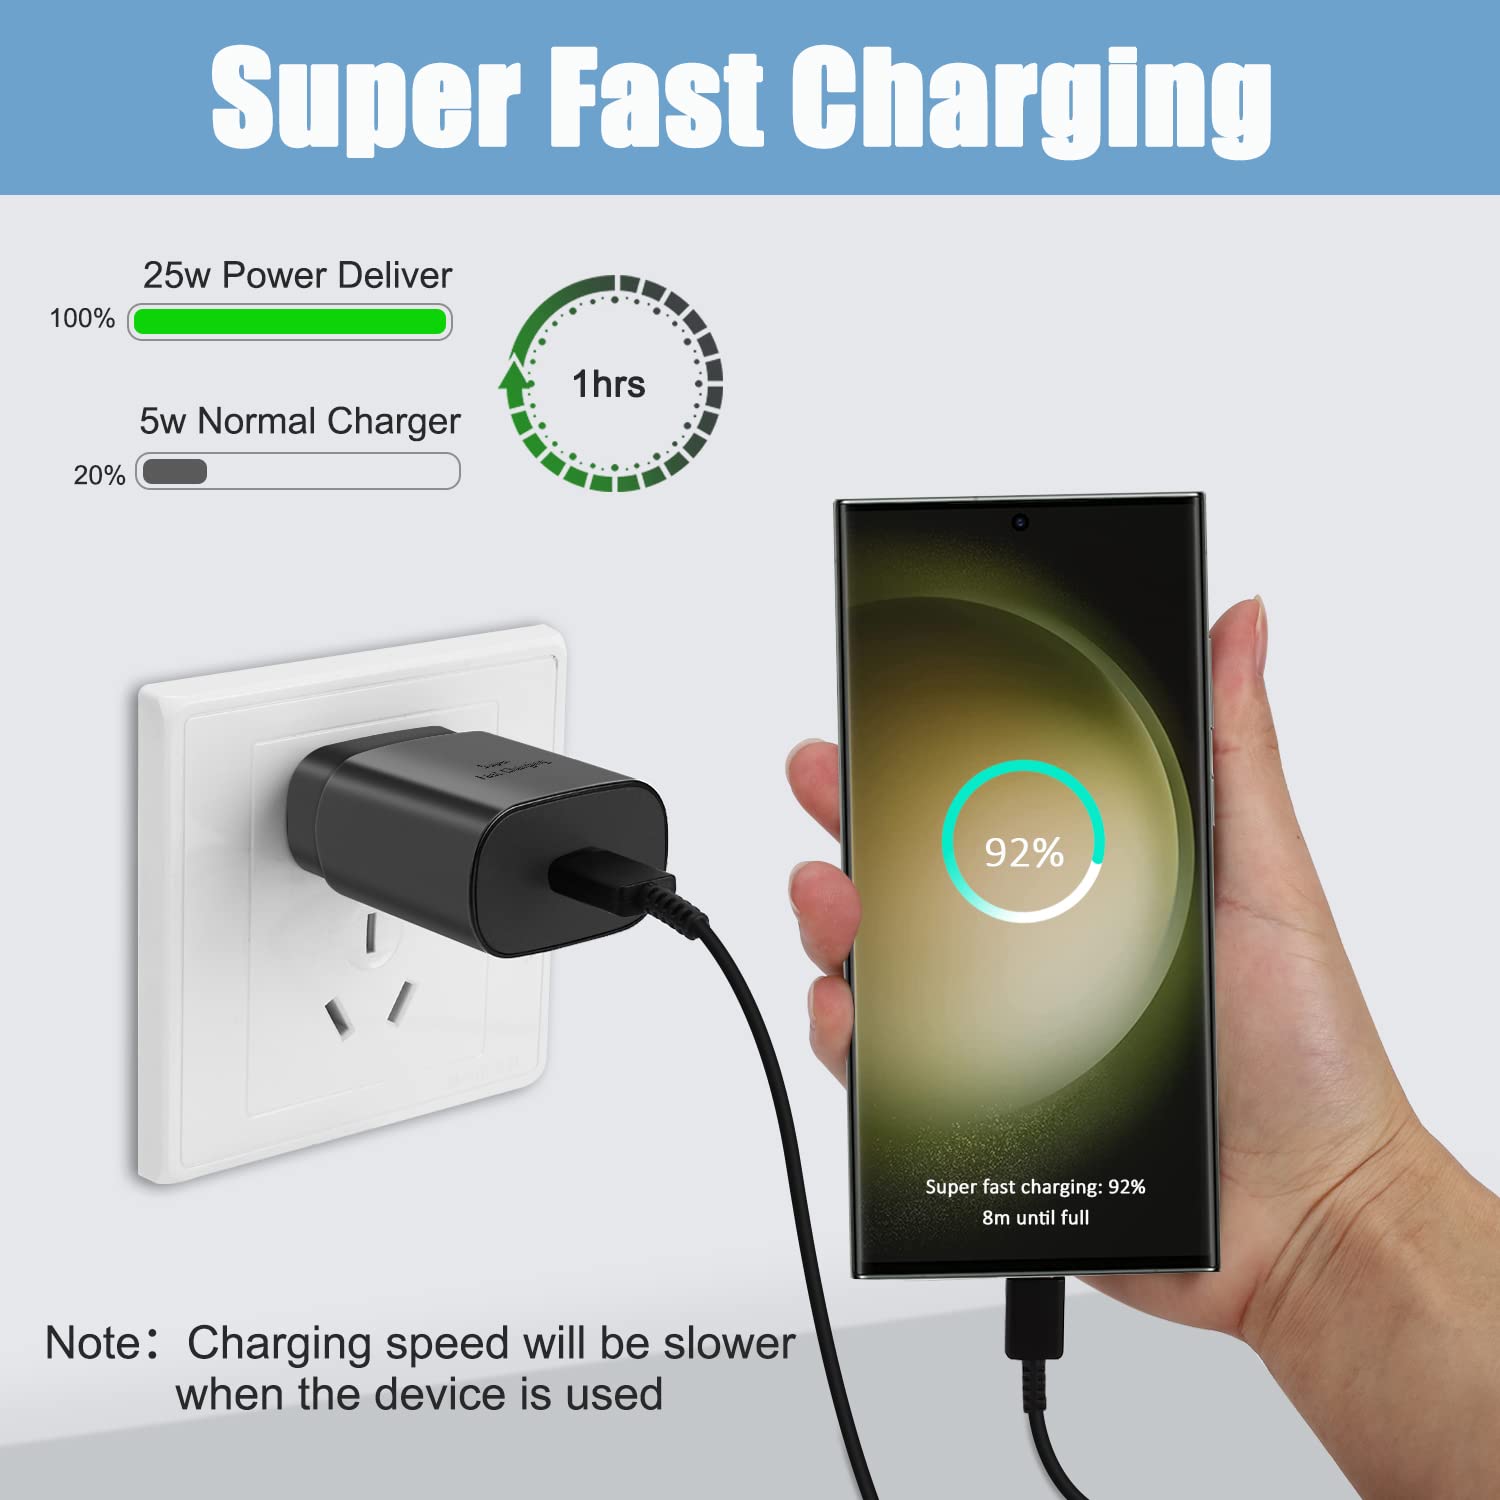 DiHines S23 S22 Ultra Samsung Super Fast charger 10FT Type c charger cable cord Fast charging & 25W USB c Android Phone charger Block fo